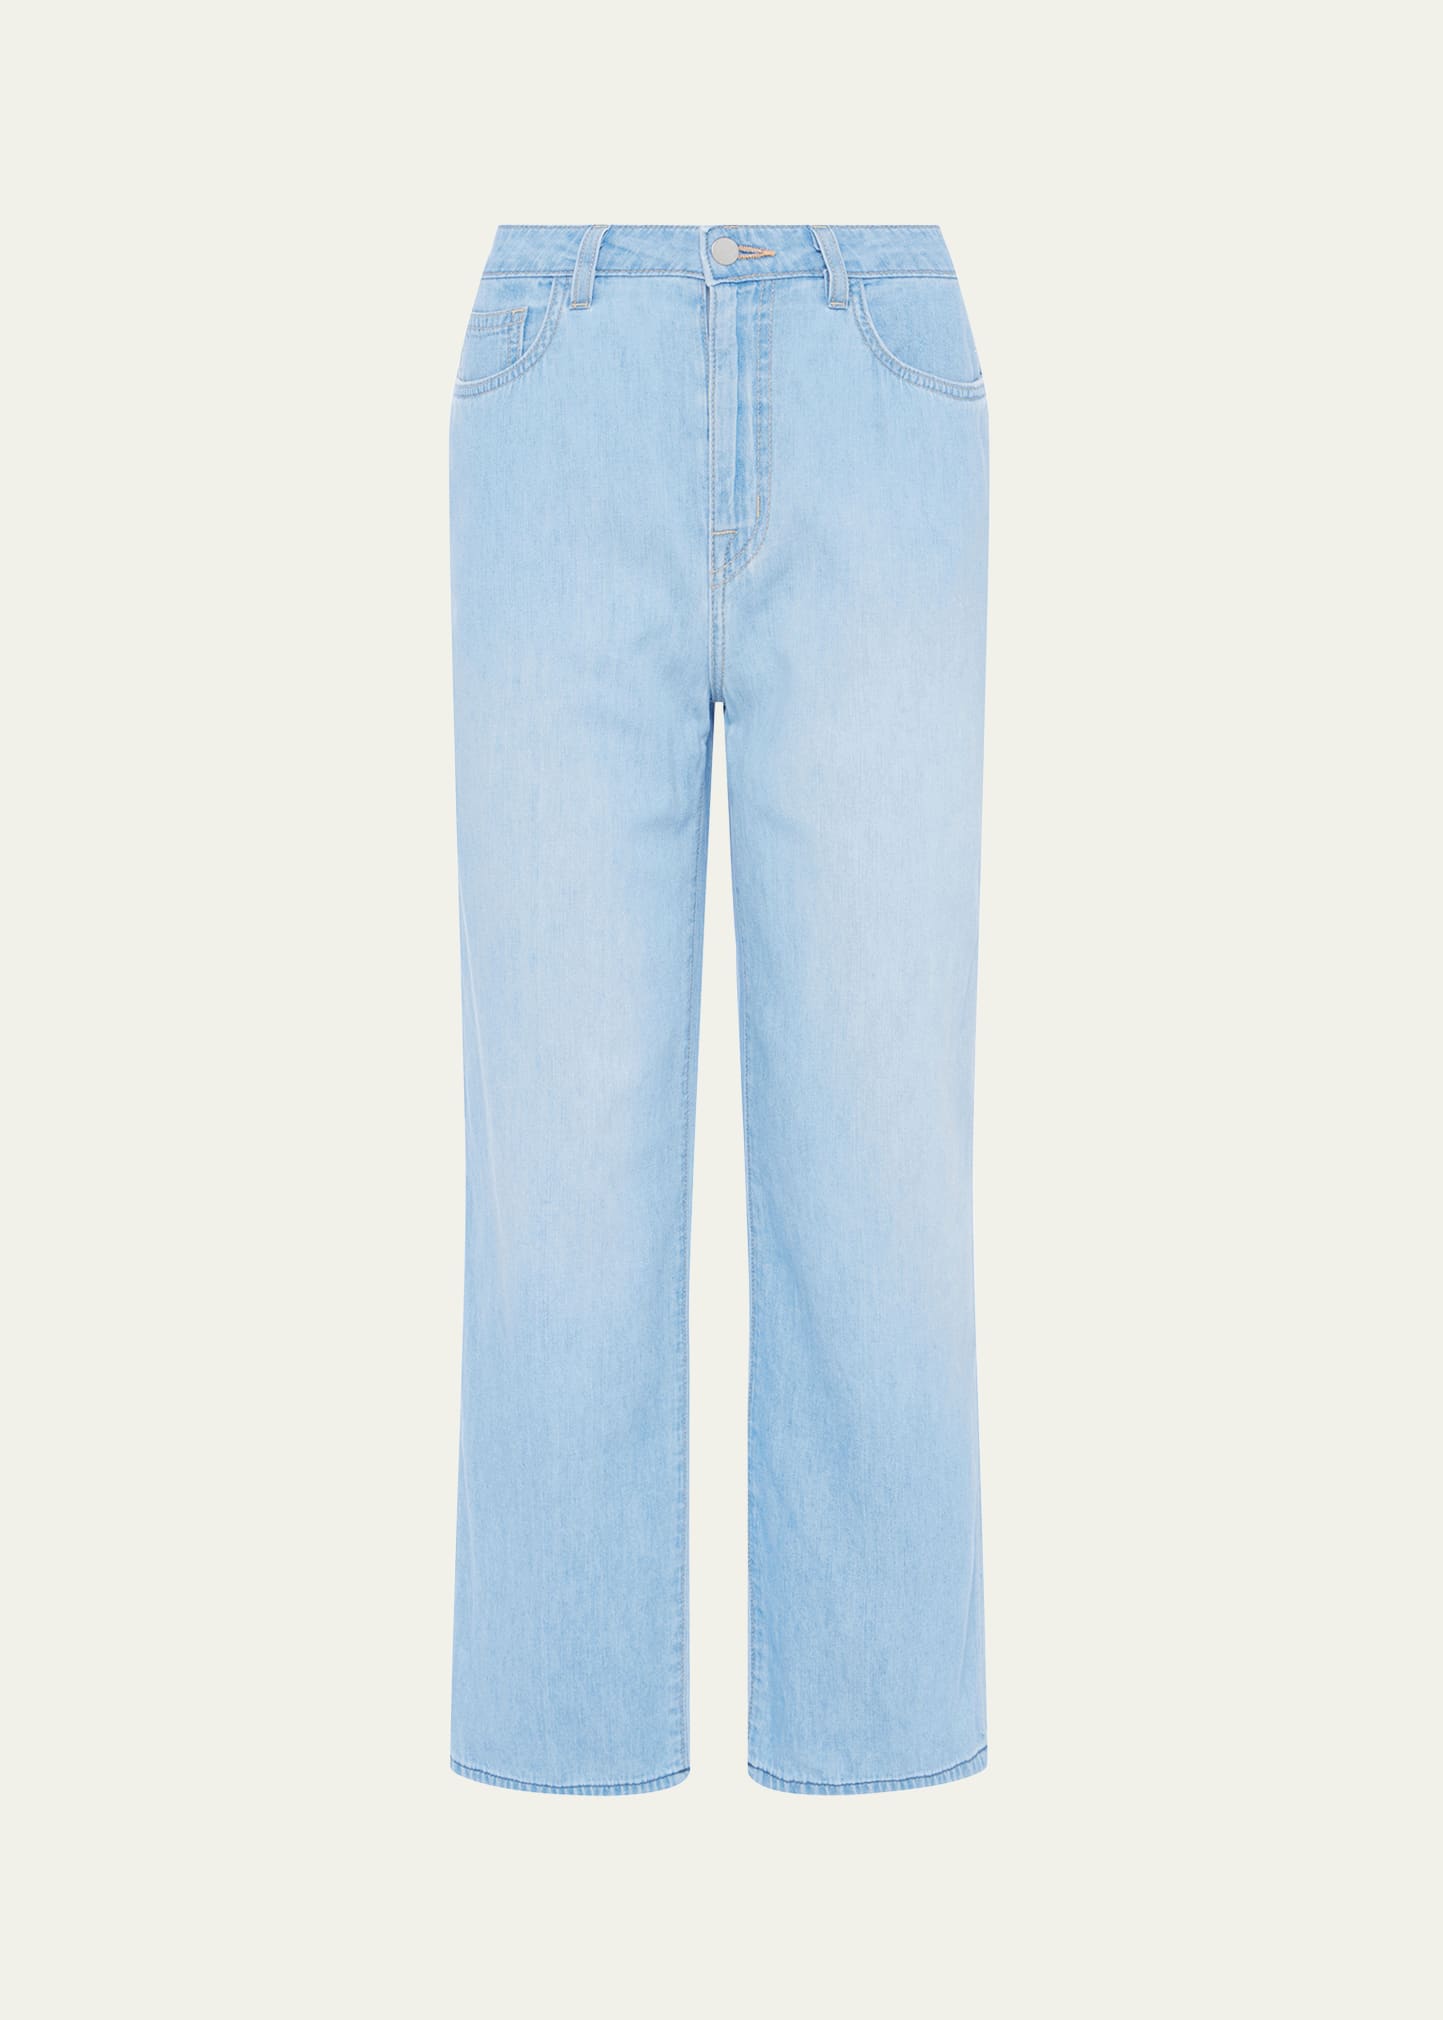 June Ultra High-Rise Crop Stovepipe Jeans